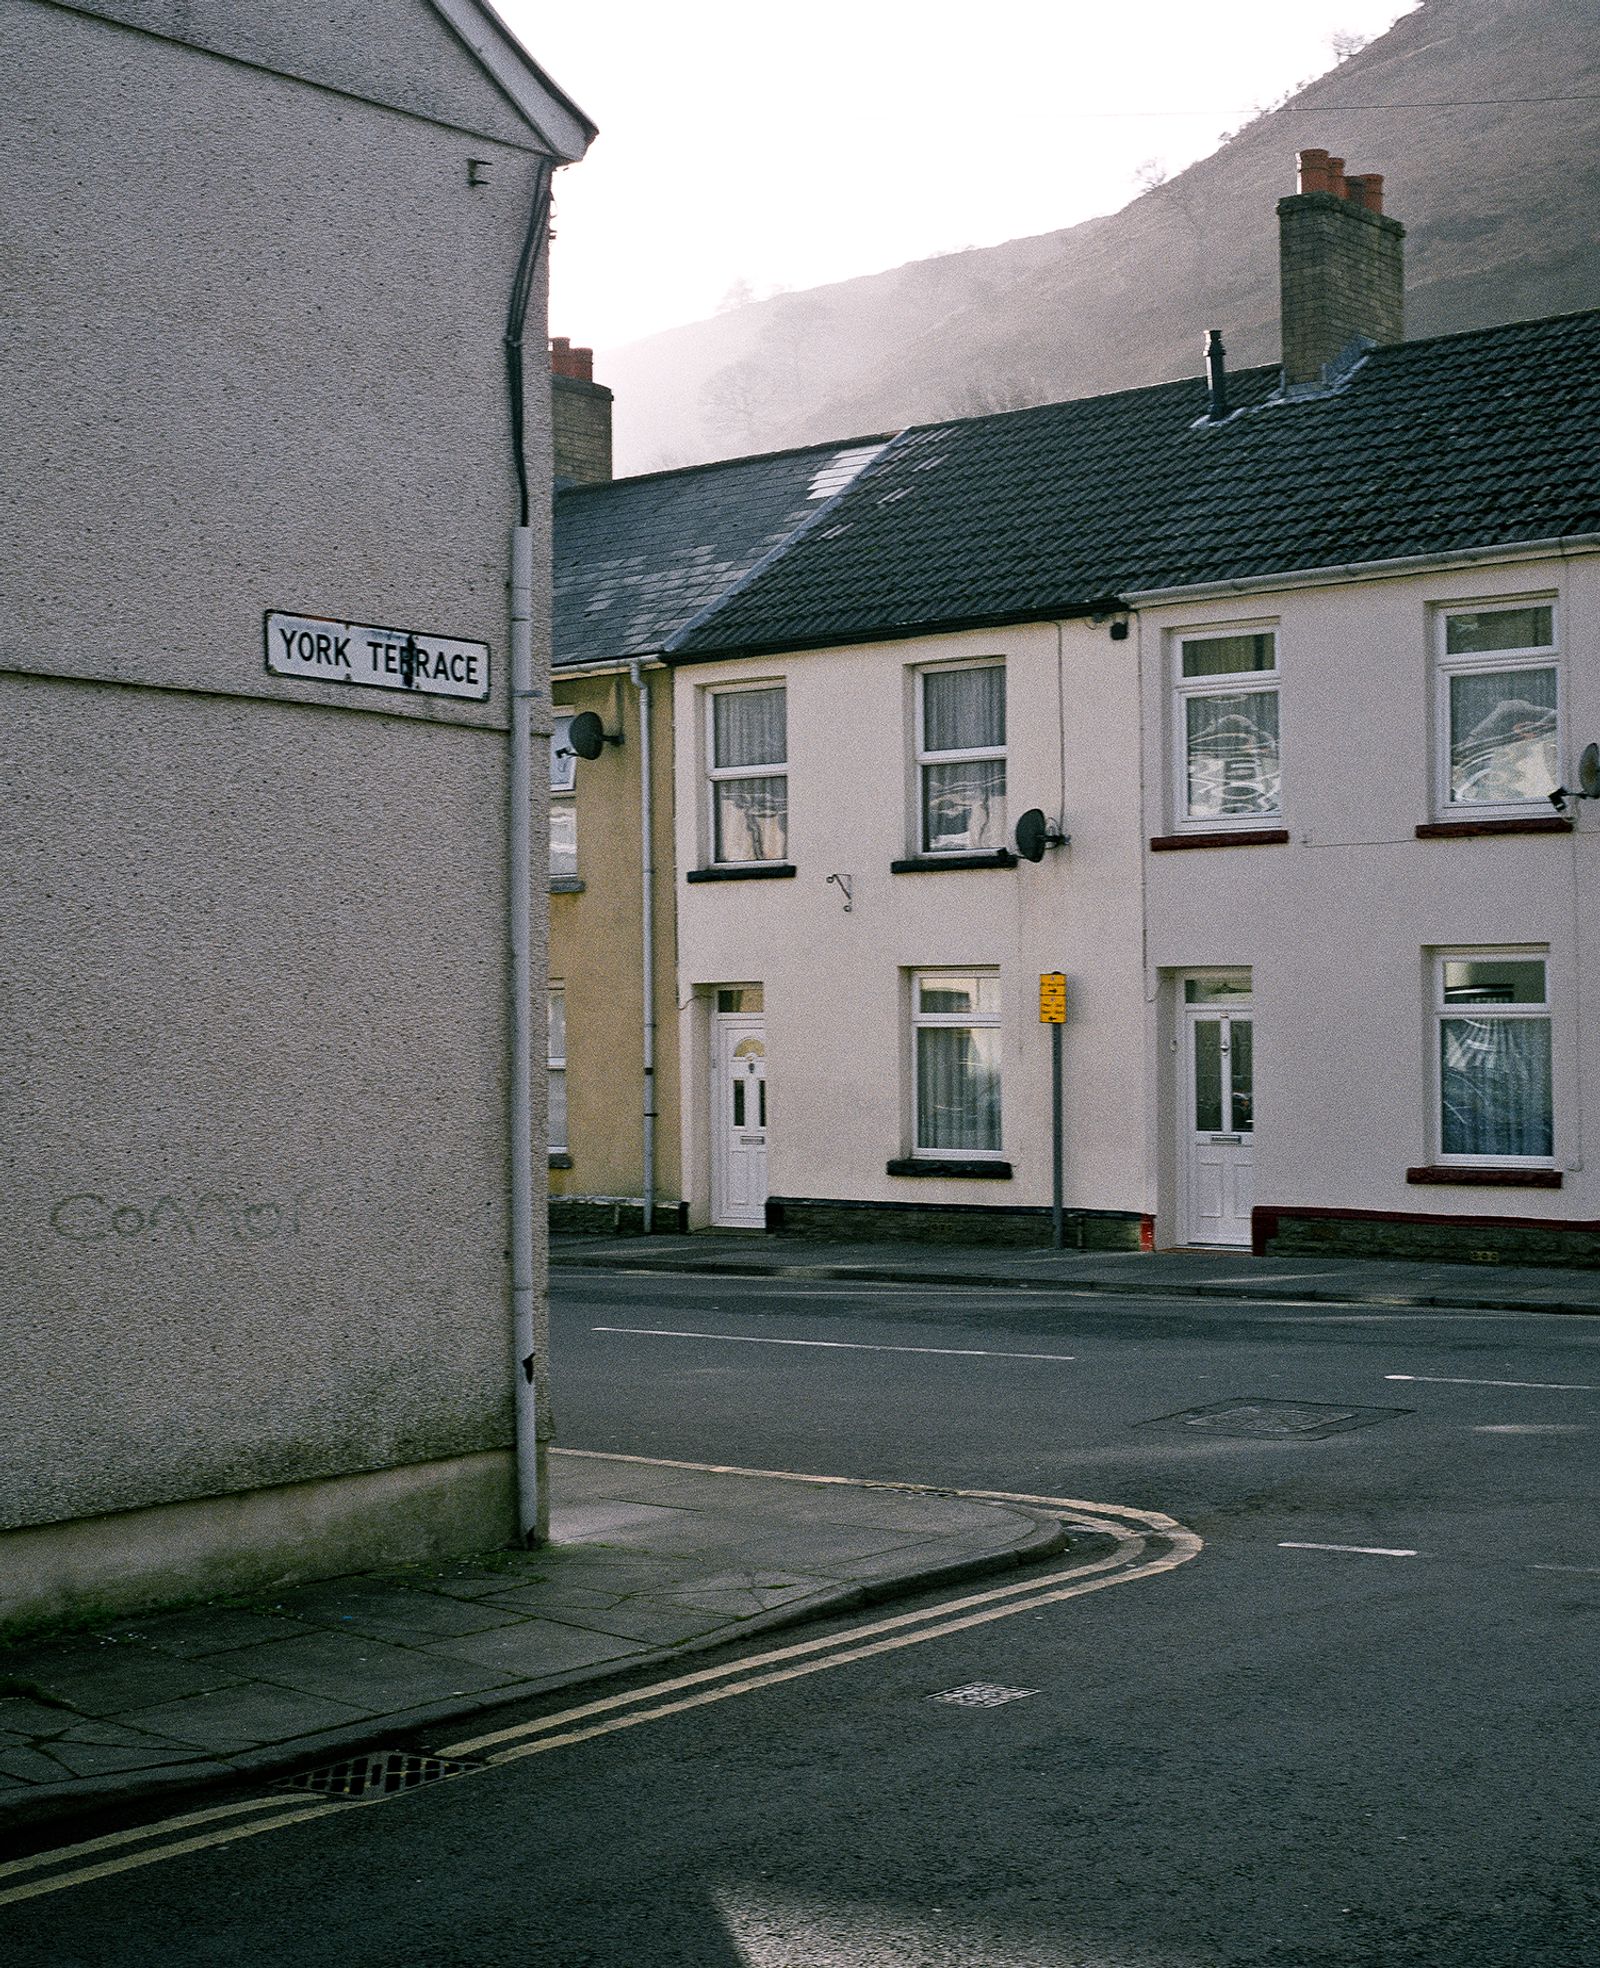 © Sebastián Bruno - Image from the BLAenau gwent photography special photography project